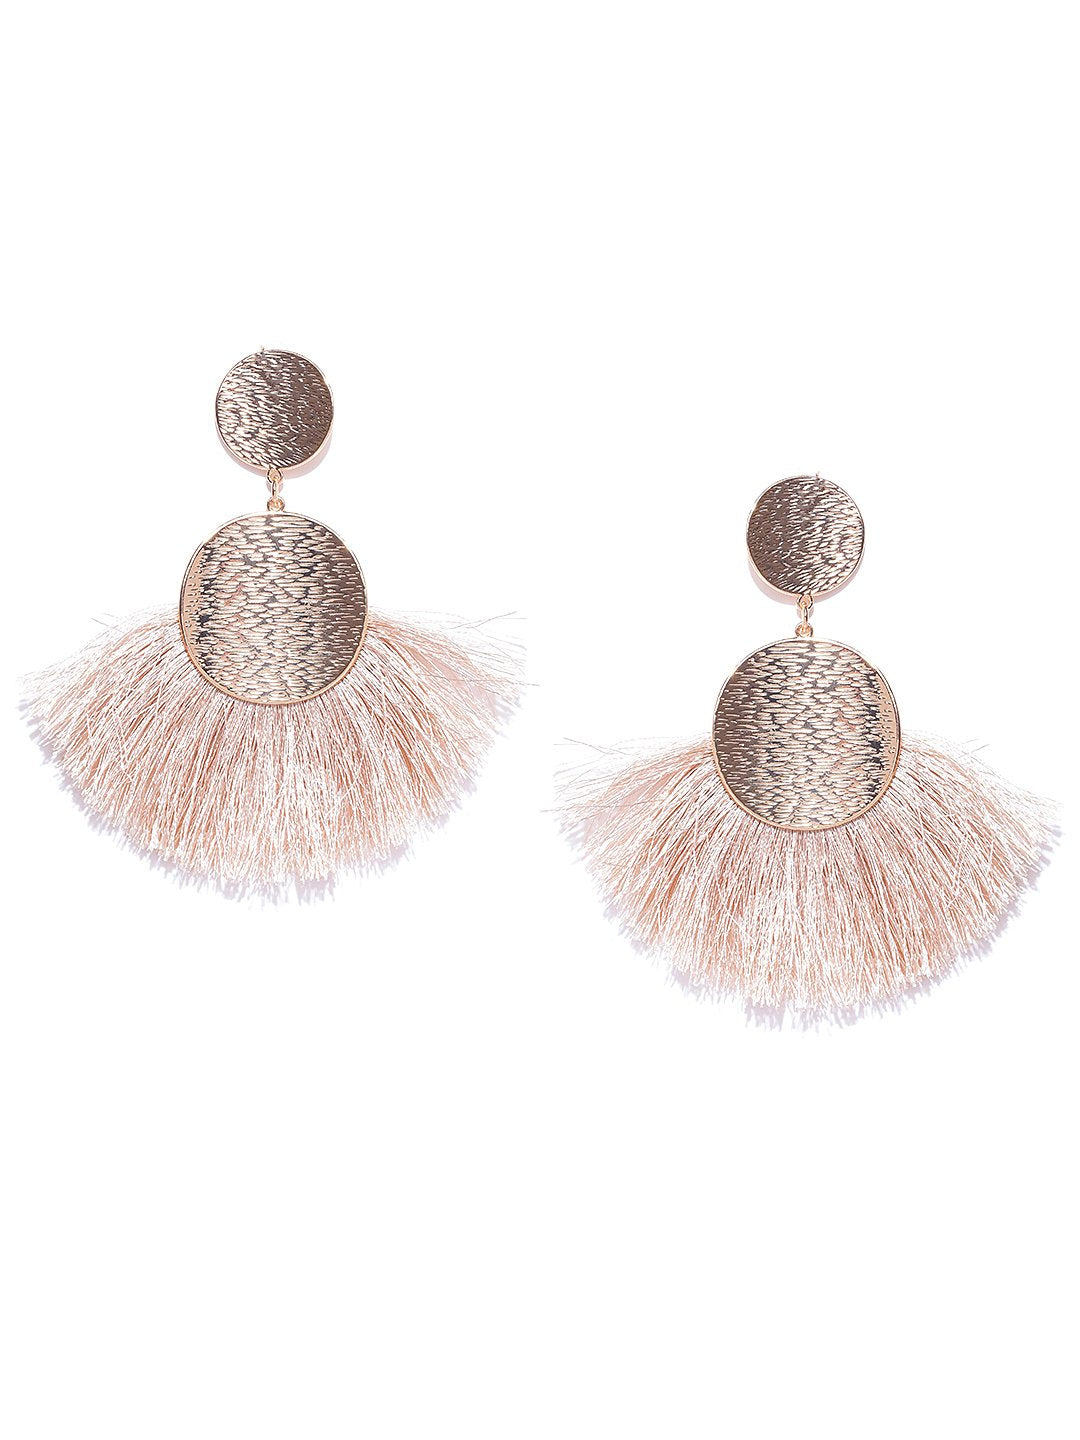 Blueberry gold and beige fringes drop earrings